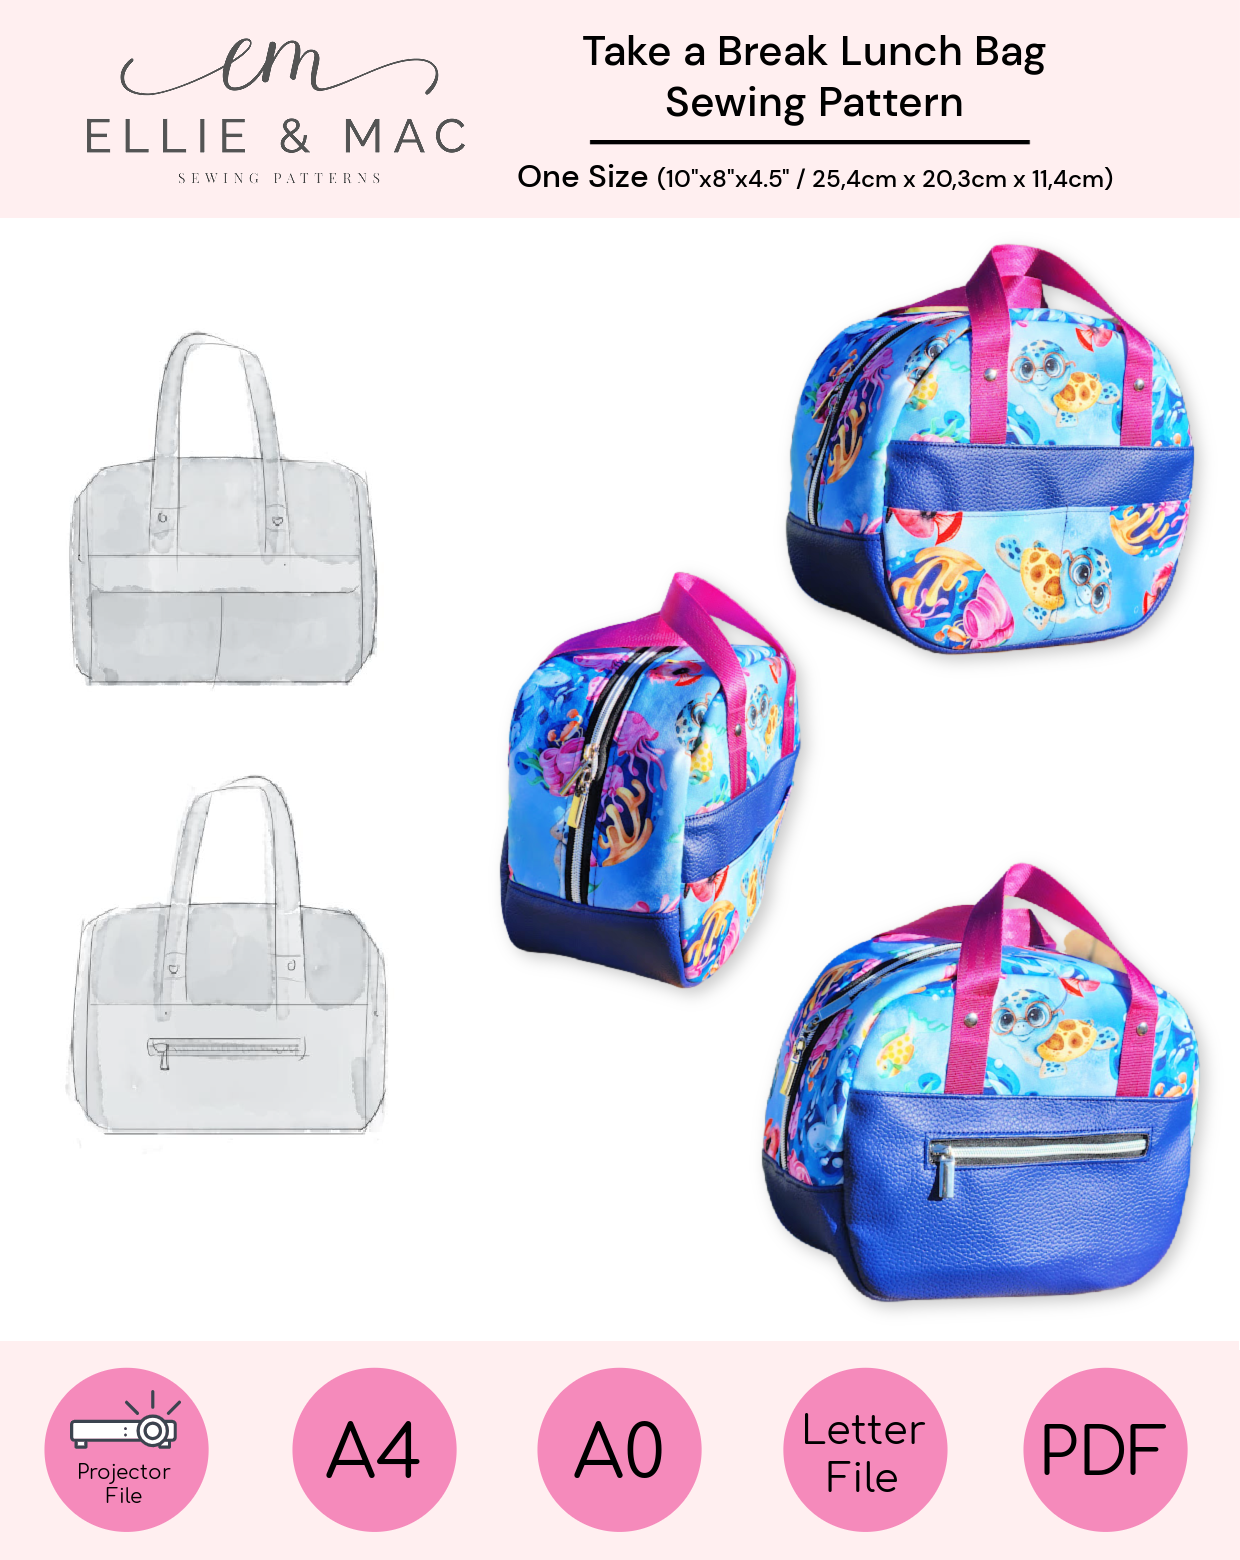 Dropship Bluey Let's Do This 16 Backpack And Lunch Bag Set to Sell Online  at a Lower Price